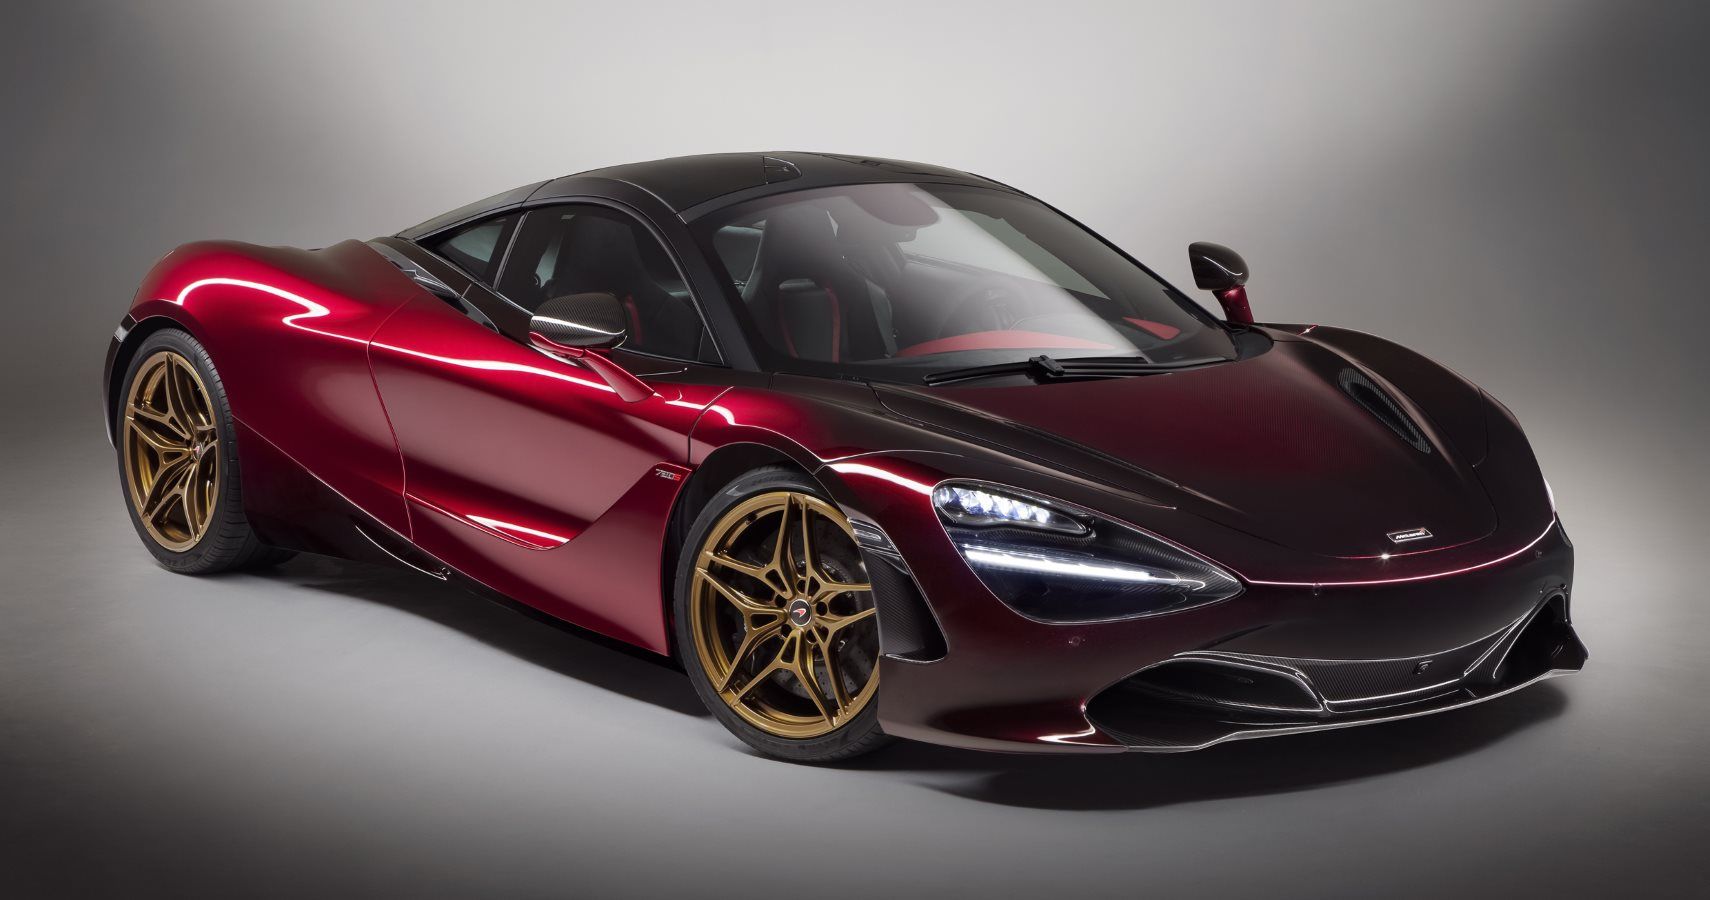 Here Is That McLaren 720S Ice-T Was Driving When He Was Arrested For Blasting Through Toll Booth